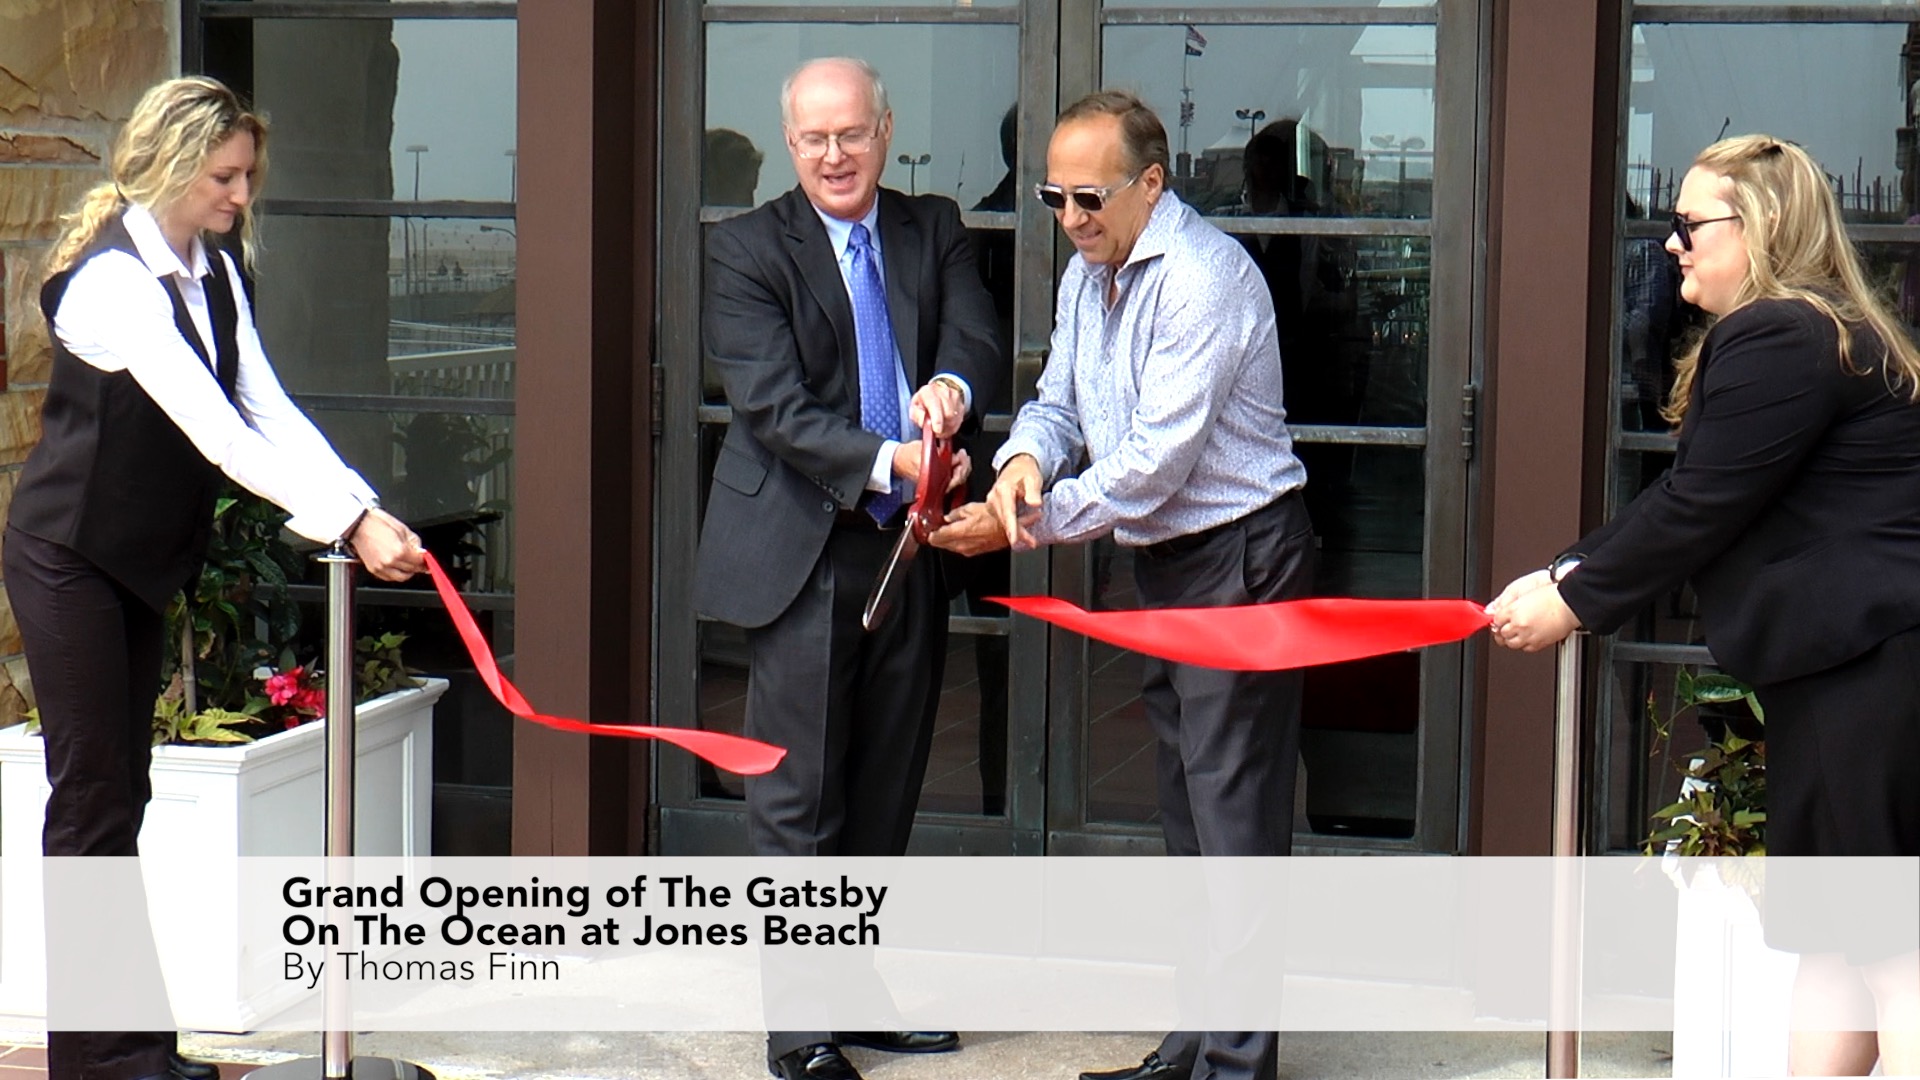 Grand Opening of The Gatsby On The Ocean at Jones Beach